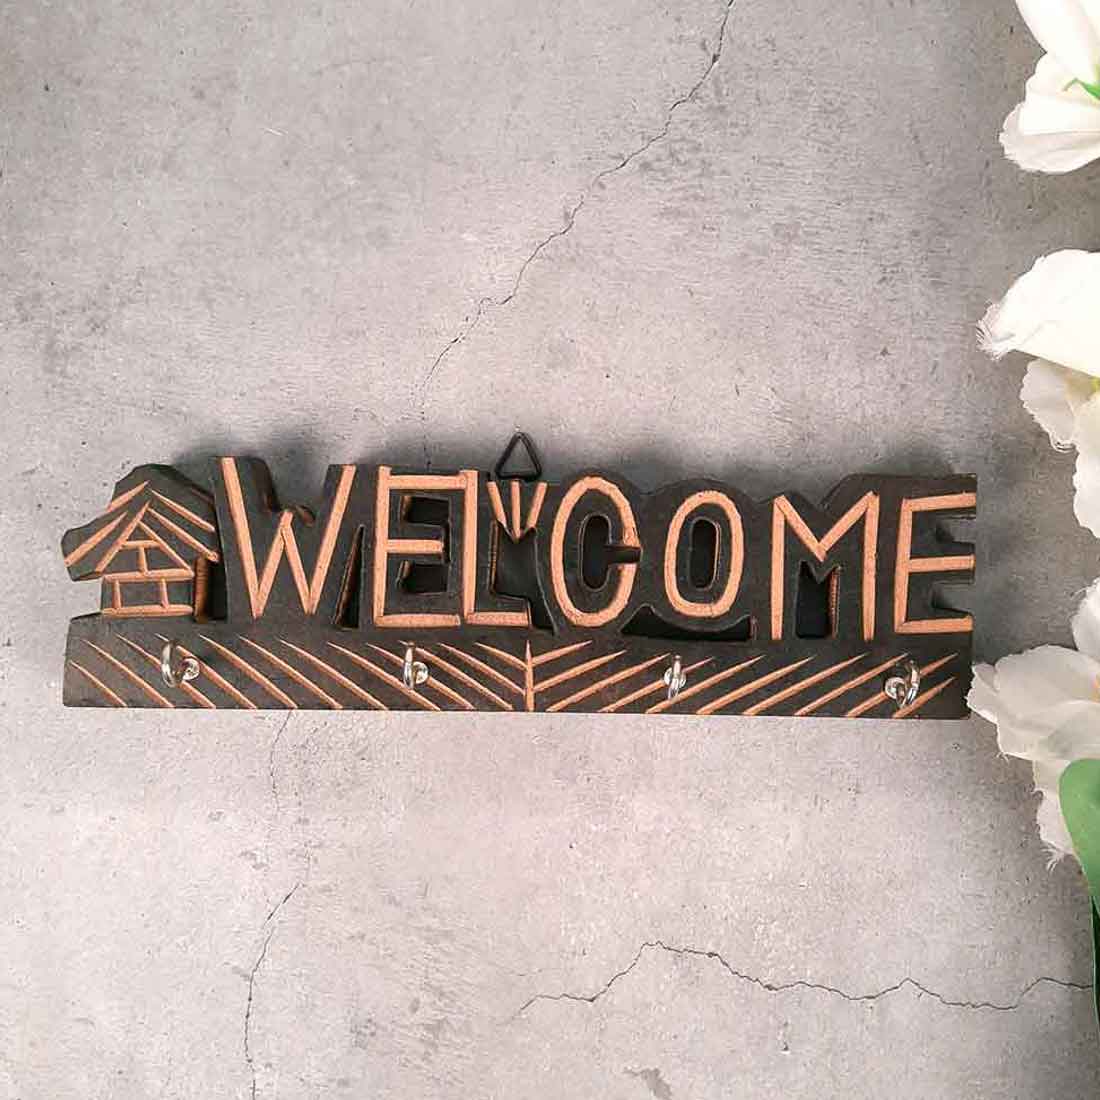 Key Holder Wall Hanging | Key Hook Stand - Welcome Design | Wooden Keys Organizer - For Home, Entrance, Office Decor & Gifts - 10 Inch (4 Hooks)